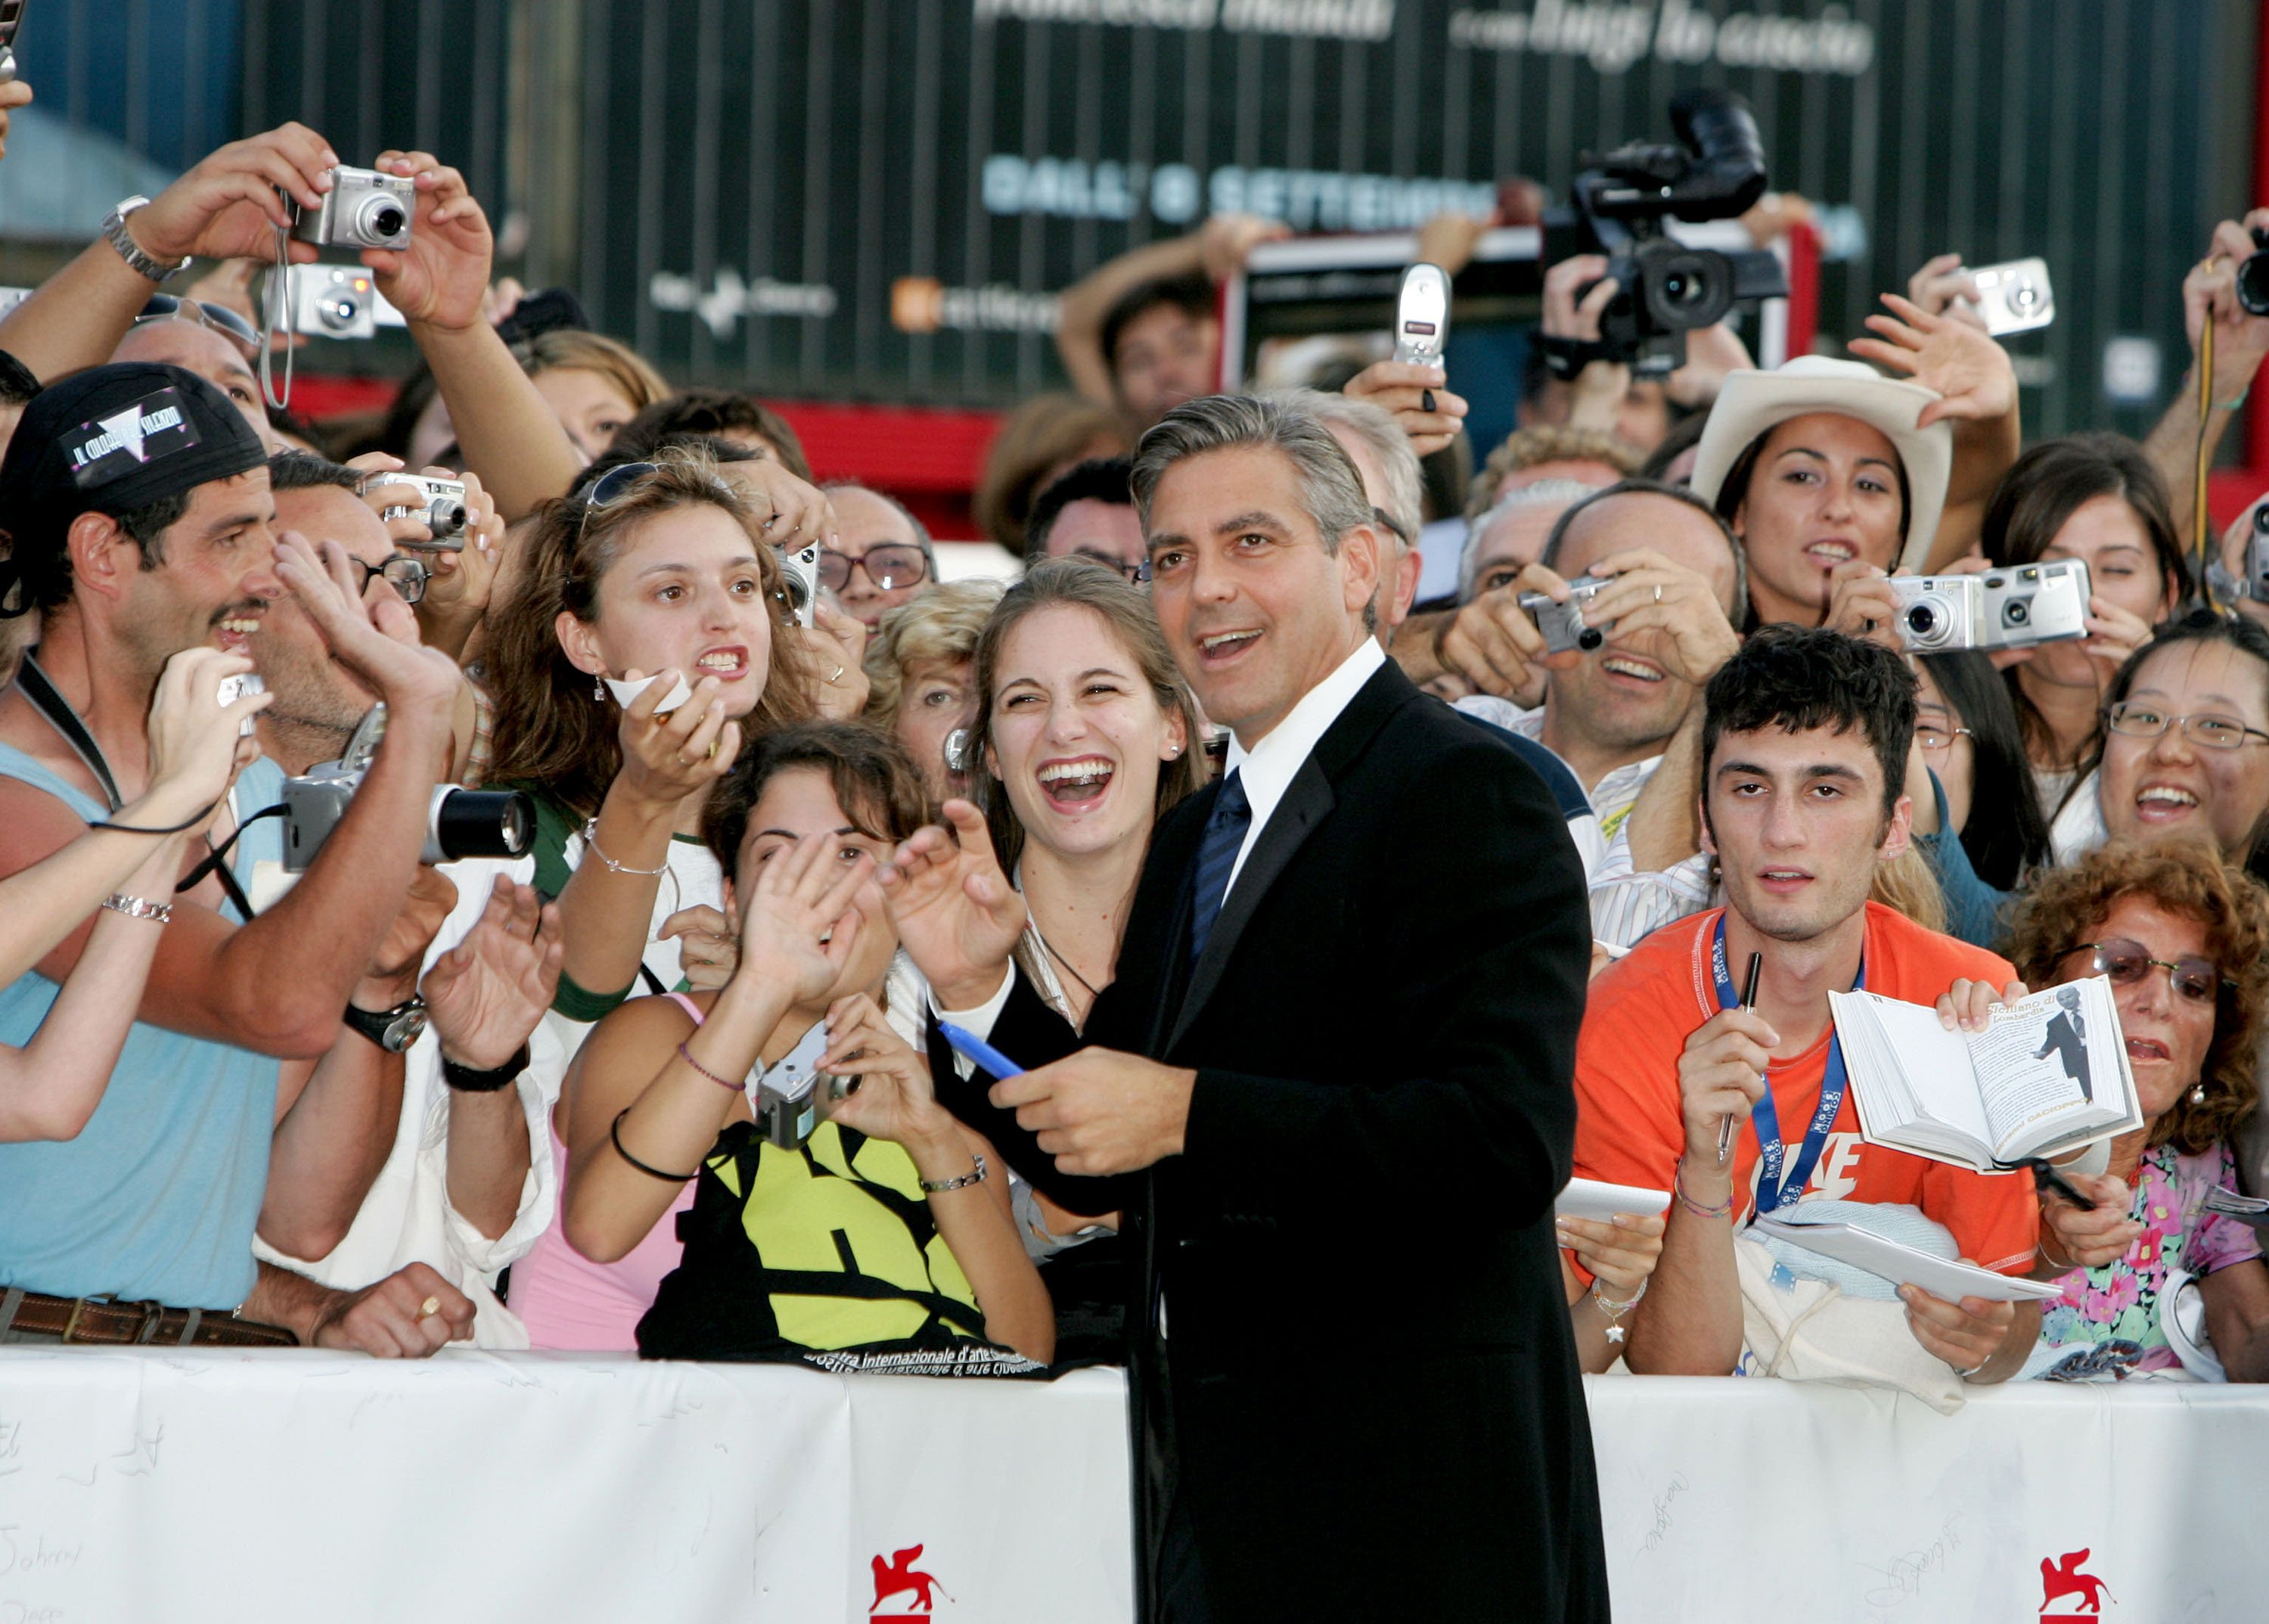 George Clooney with fans at the Closing Ceremony Red Carpet event during the 2005 Venice Film Festival. | Source: Getty Images